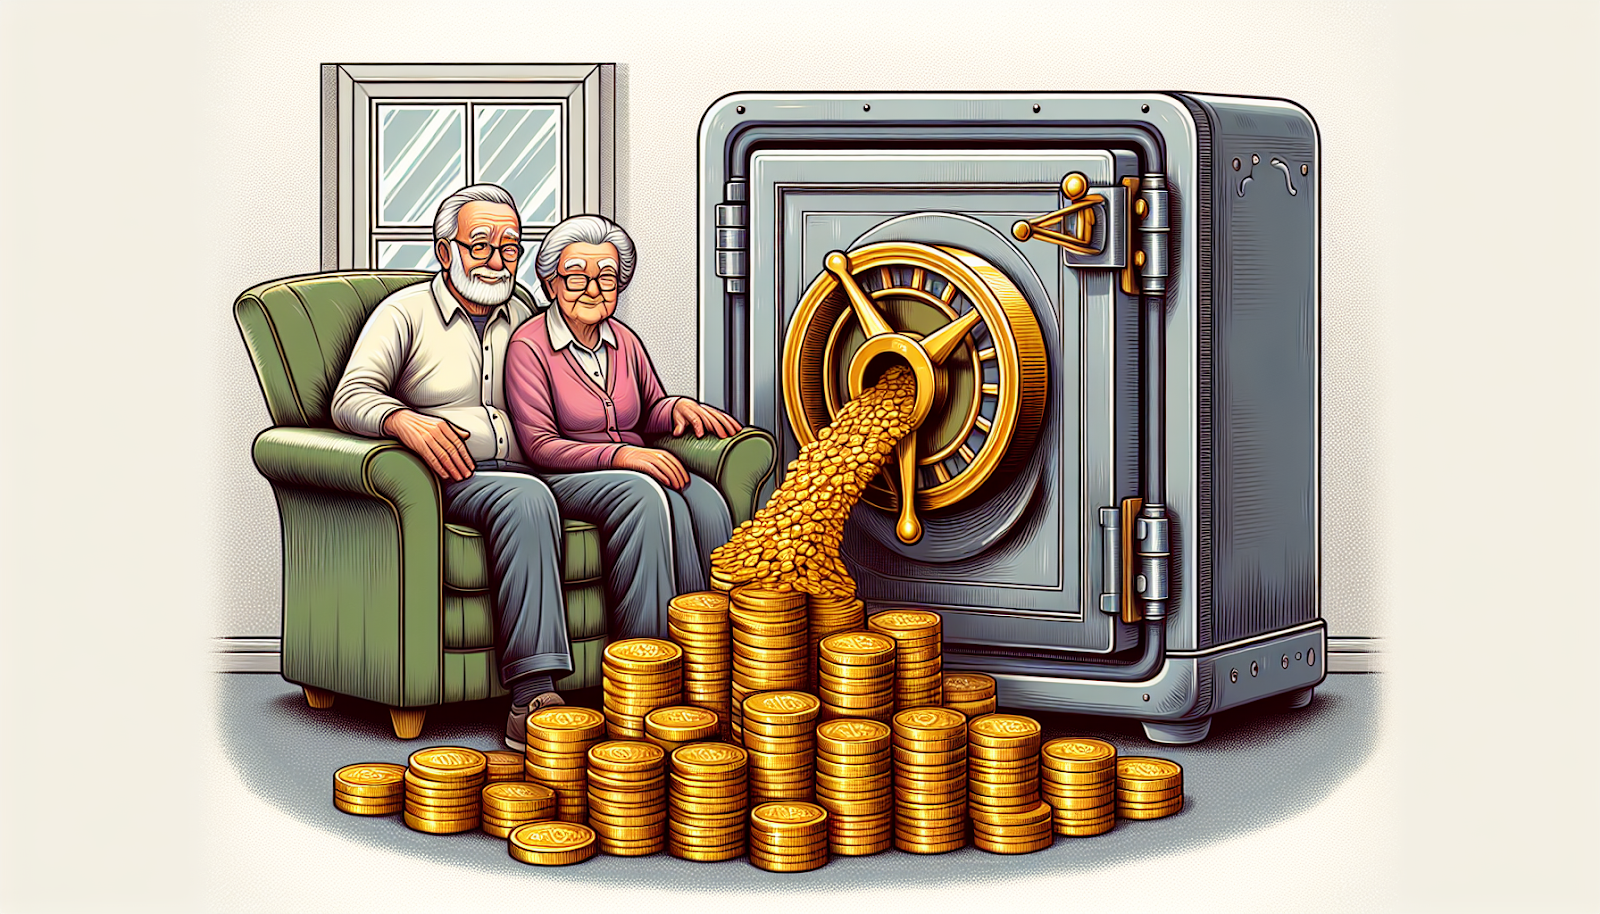 Illustration of guaranteed income from annuity